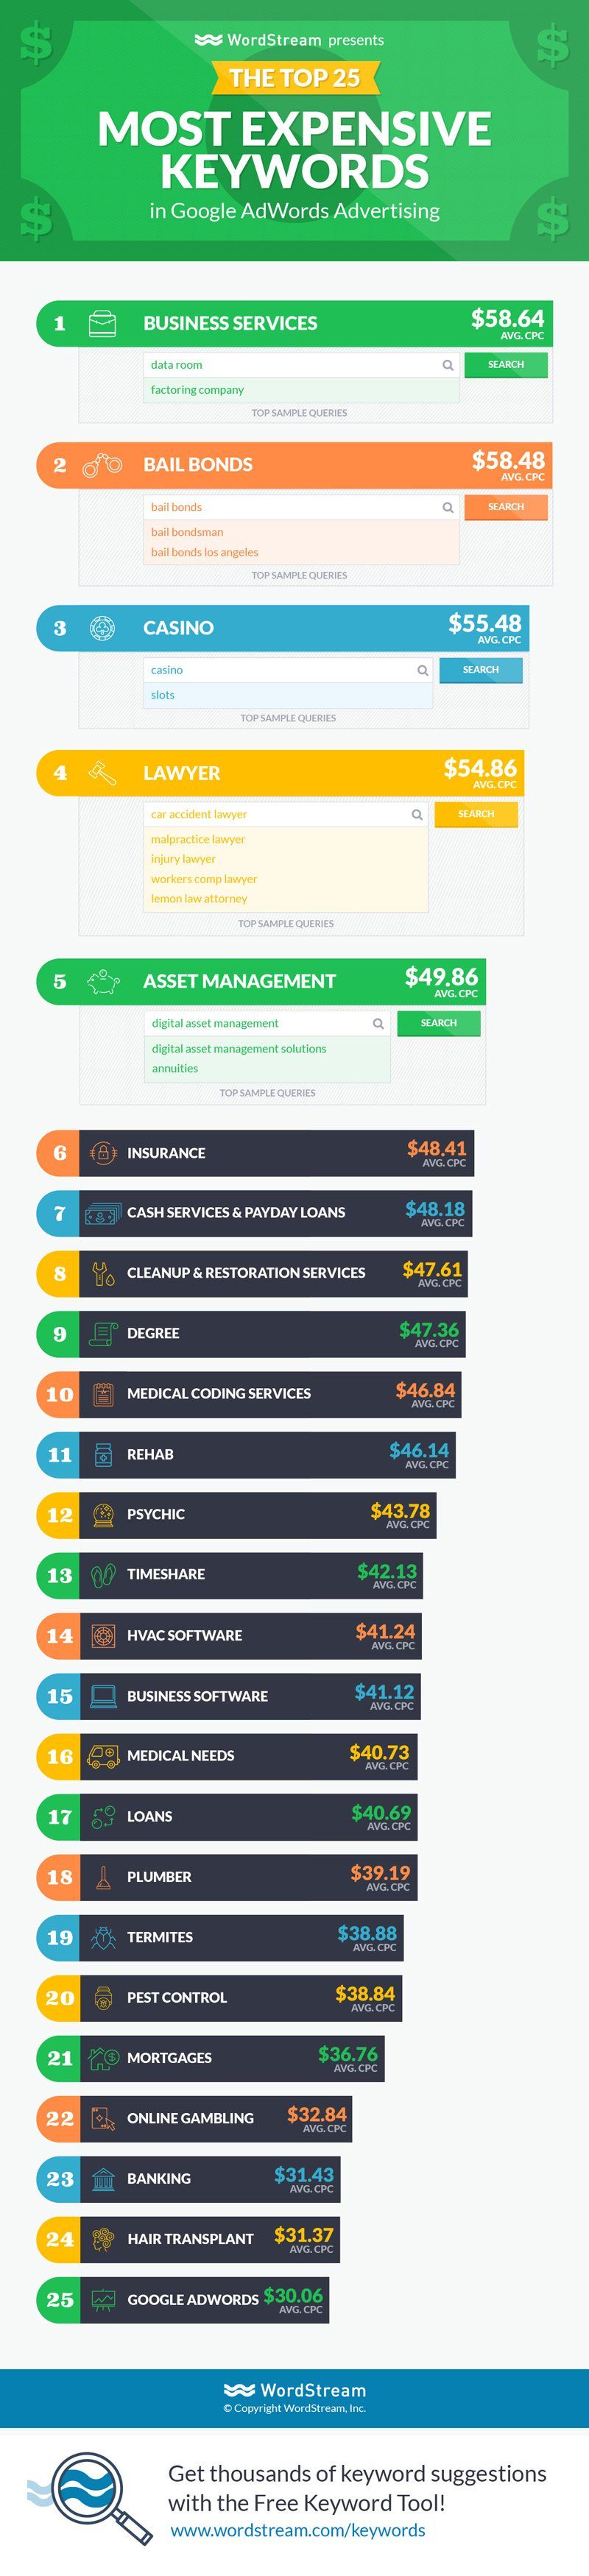 Advertising-Infographics-The-Top-25-Most-Expensive-Keywords-UK Advertising Infographics : The Top 25 Most Expensive Keywords: UK & Global Editions [Infographic]